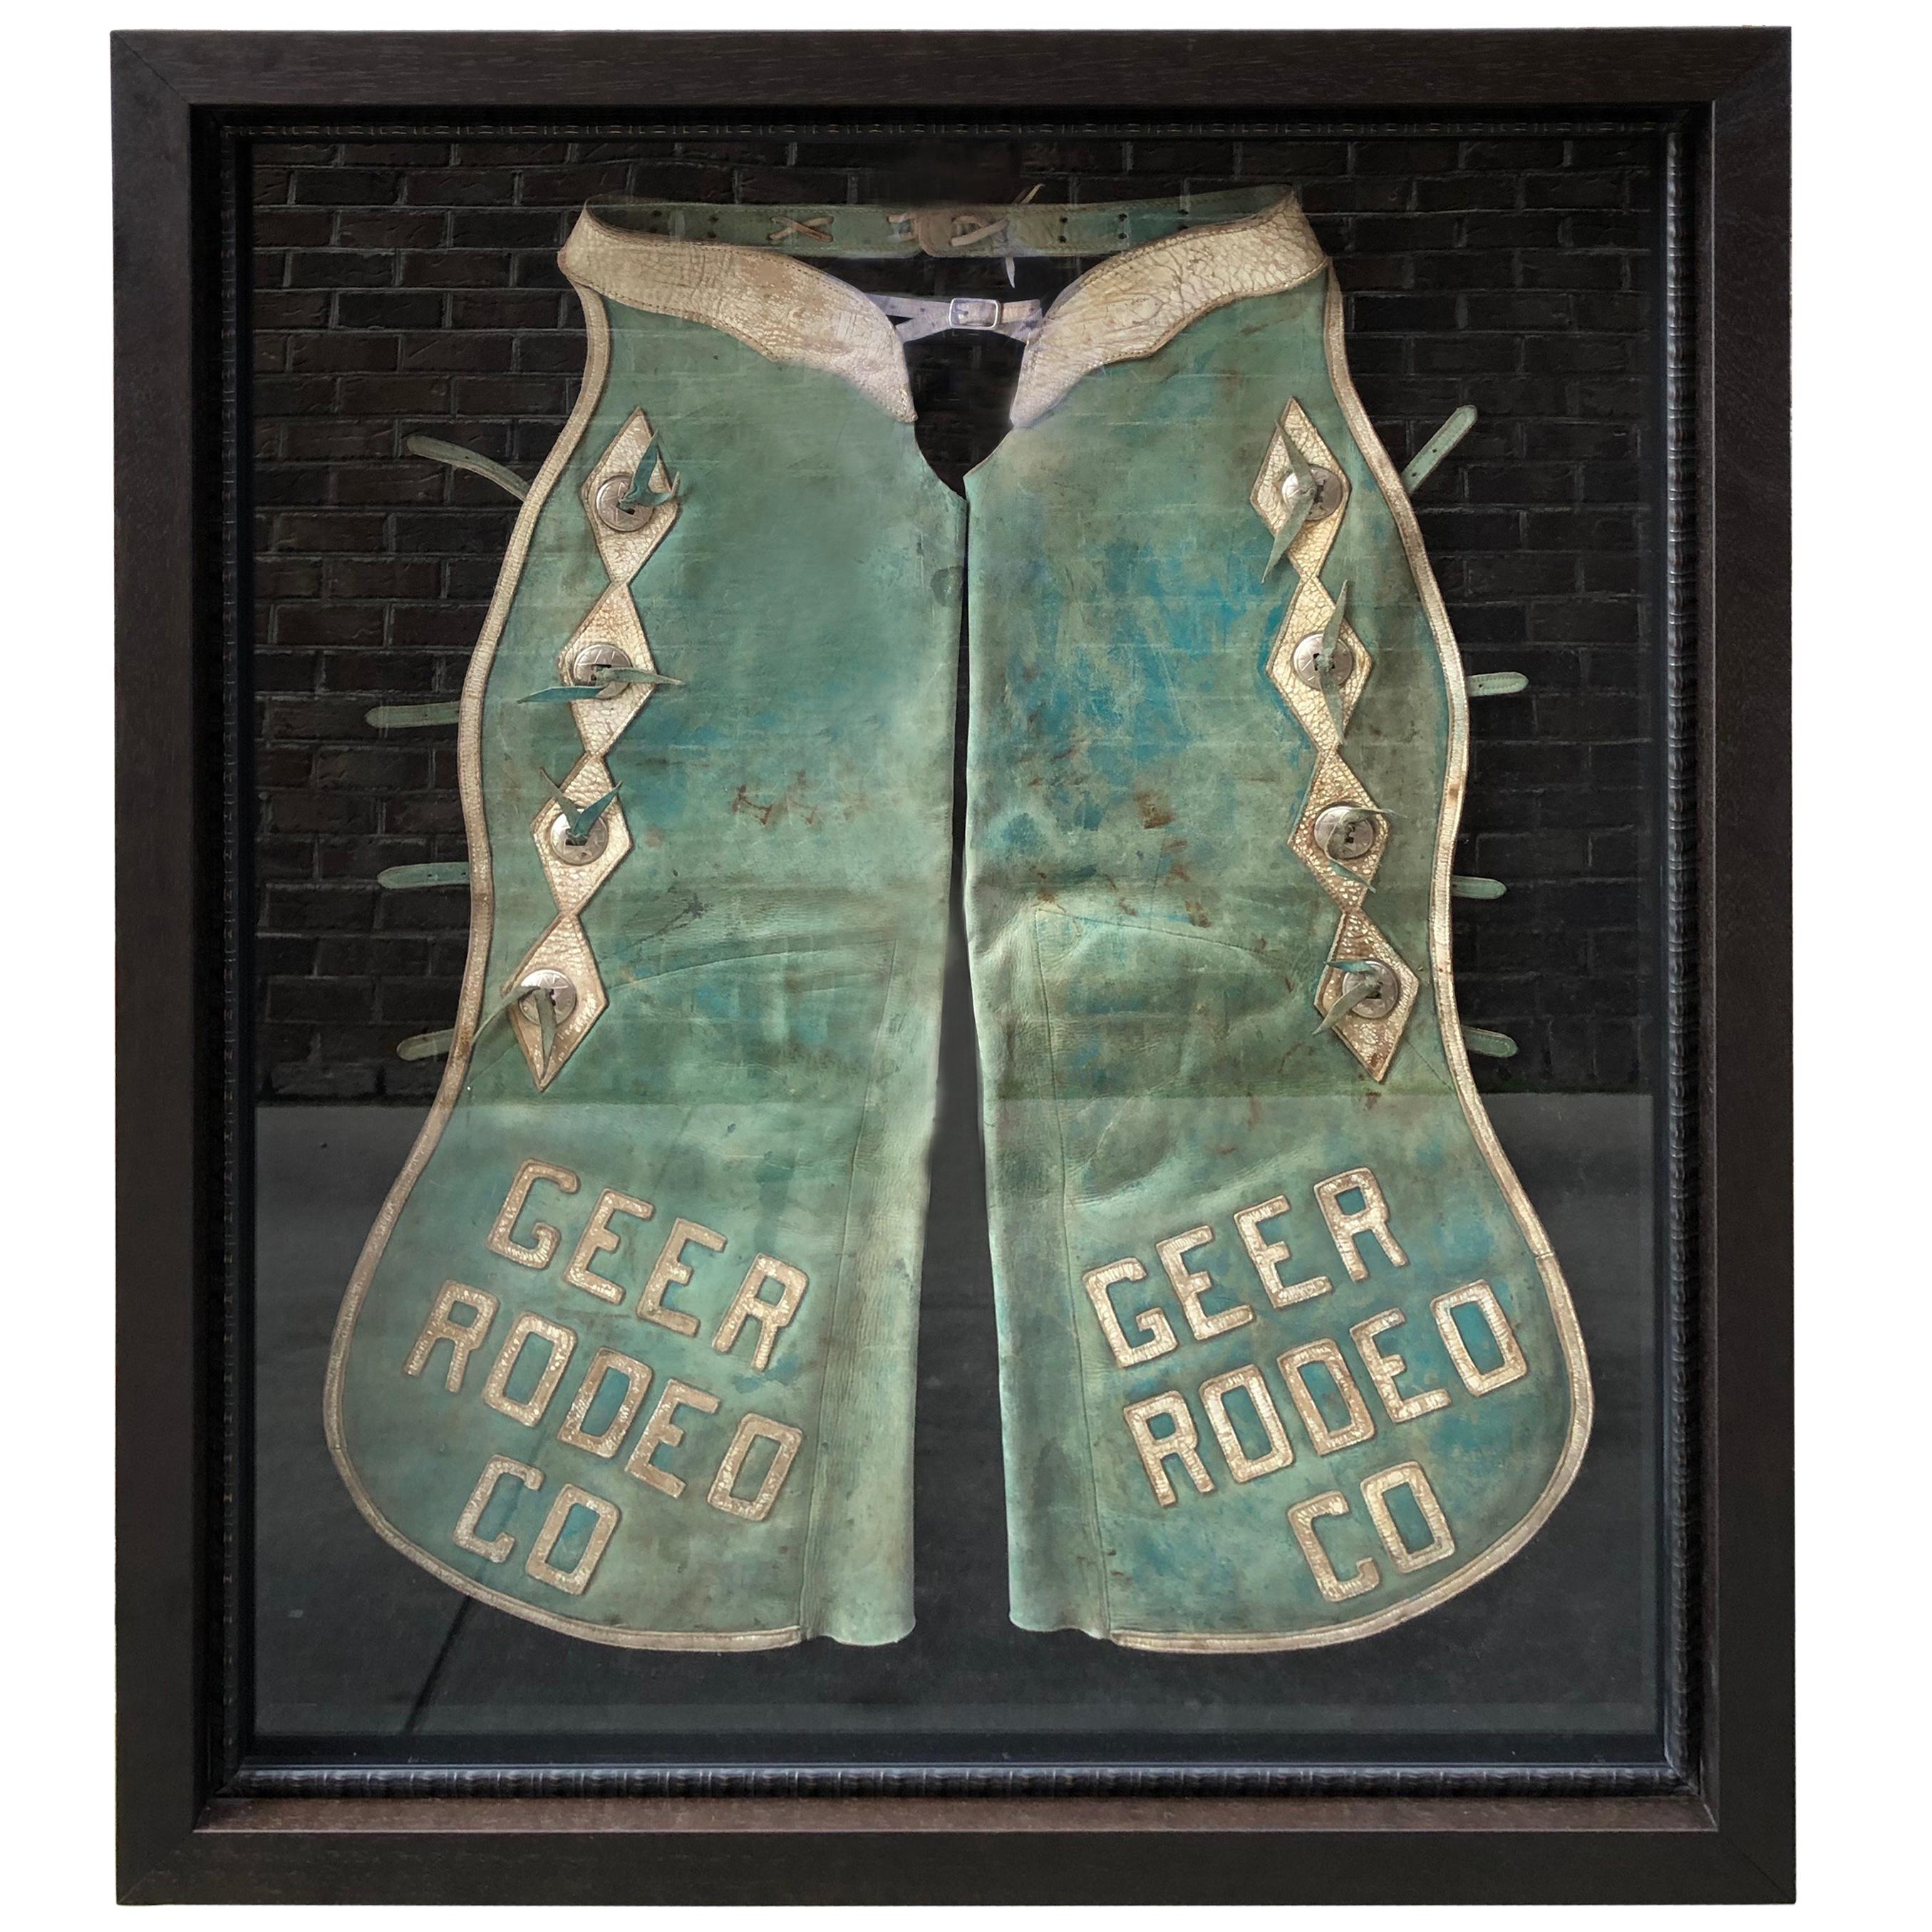 Pair of Faded Turquoise Chaps with Silver Mounts with Geer Rodeo Company